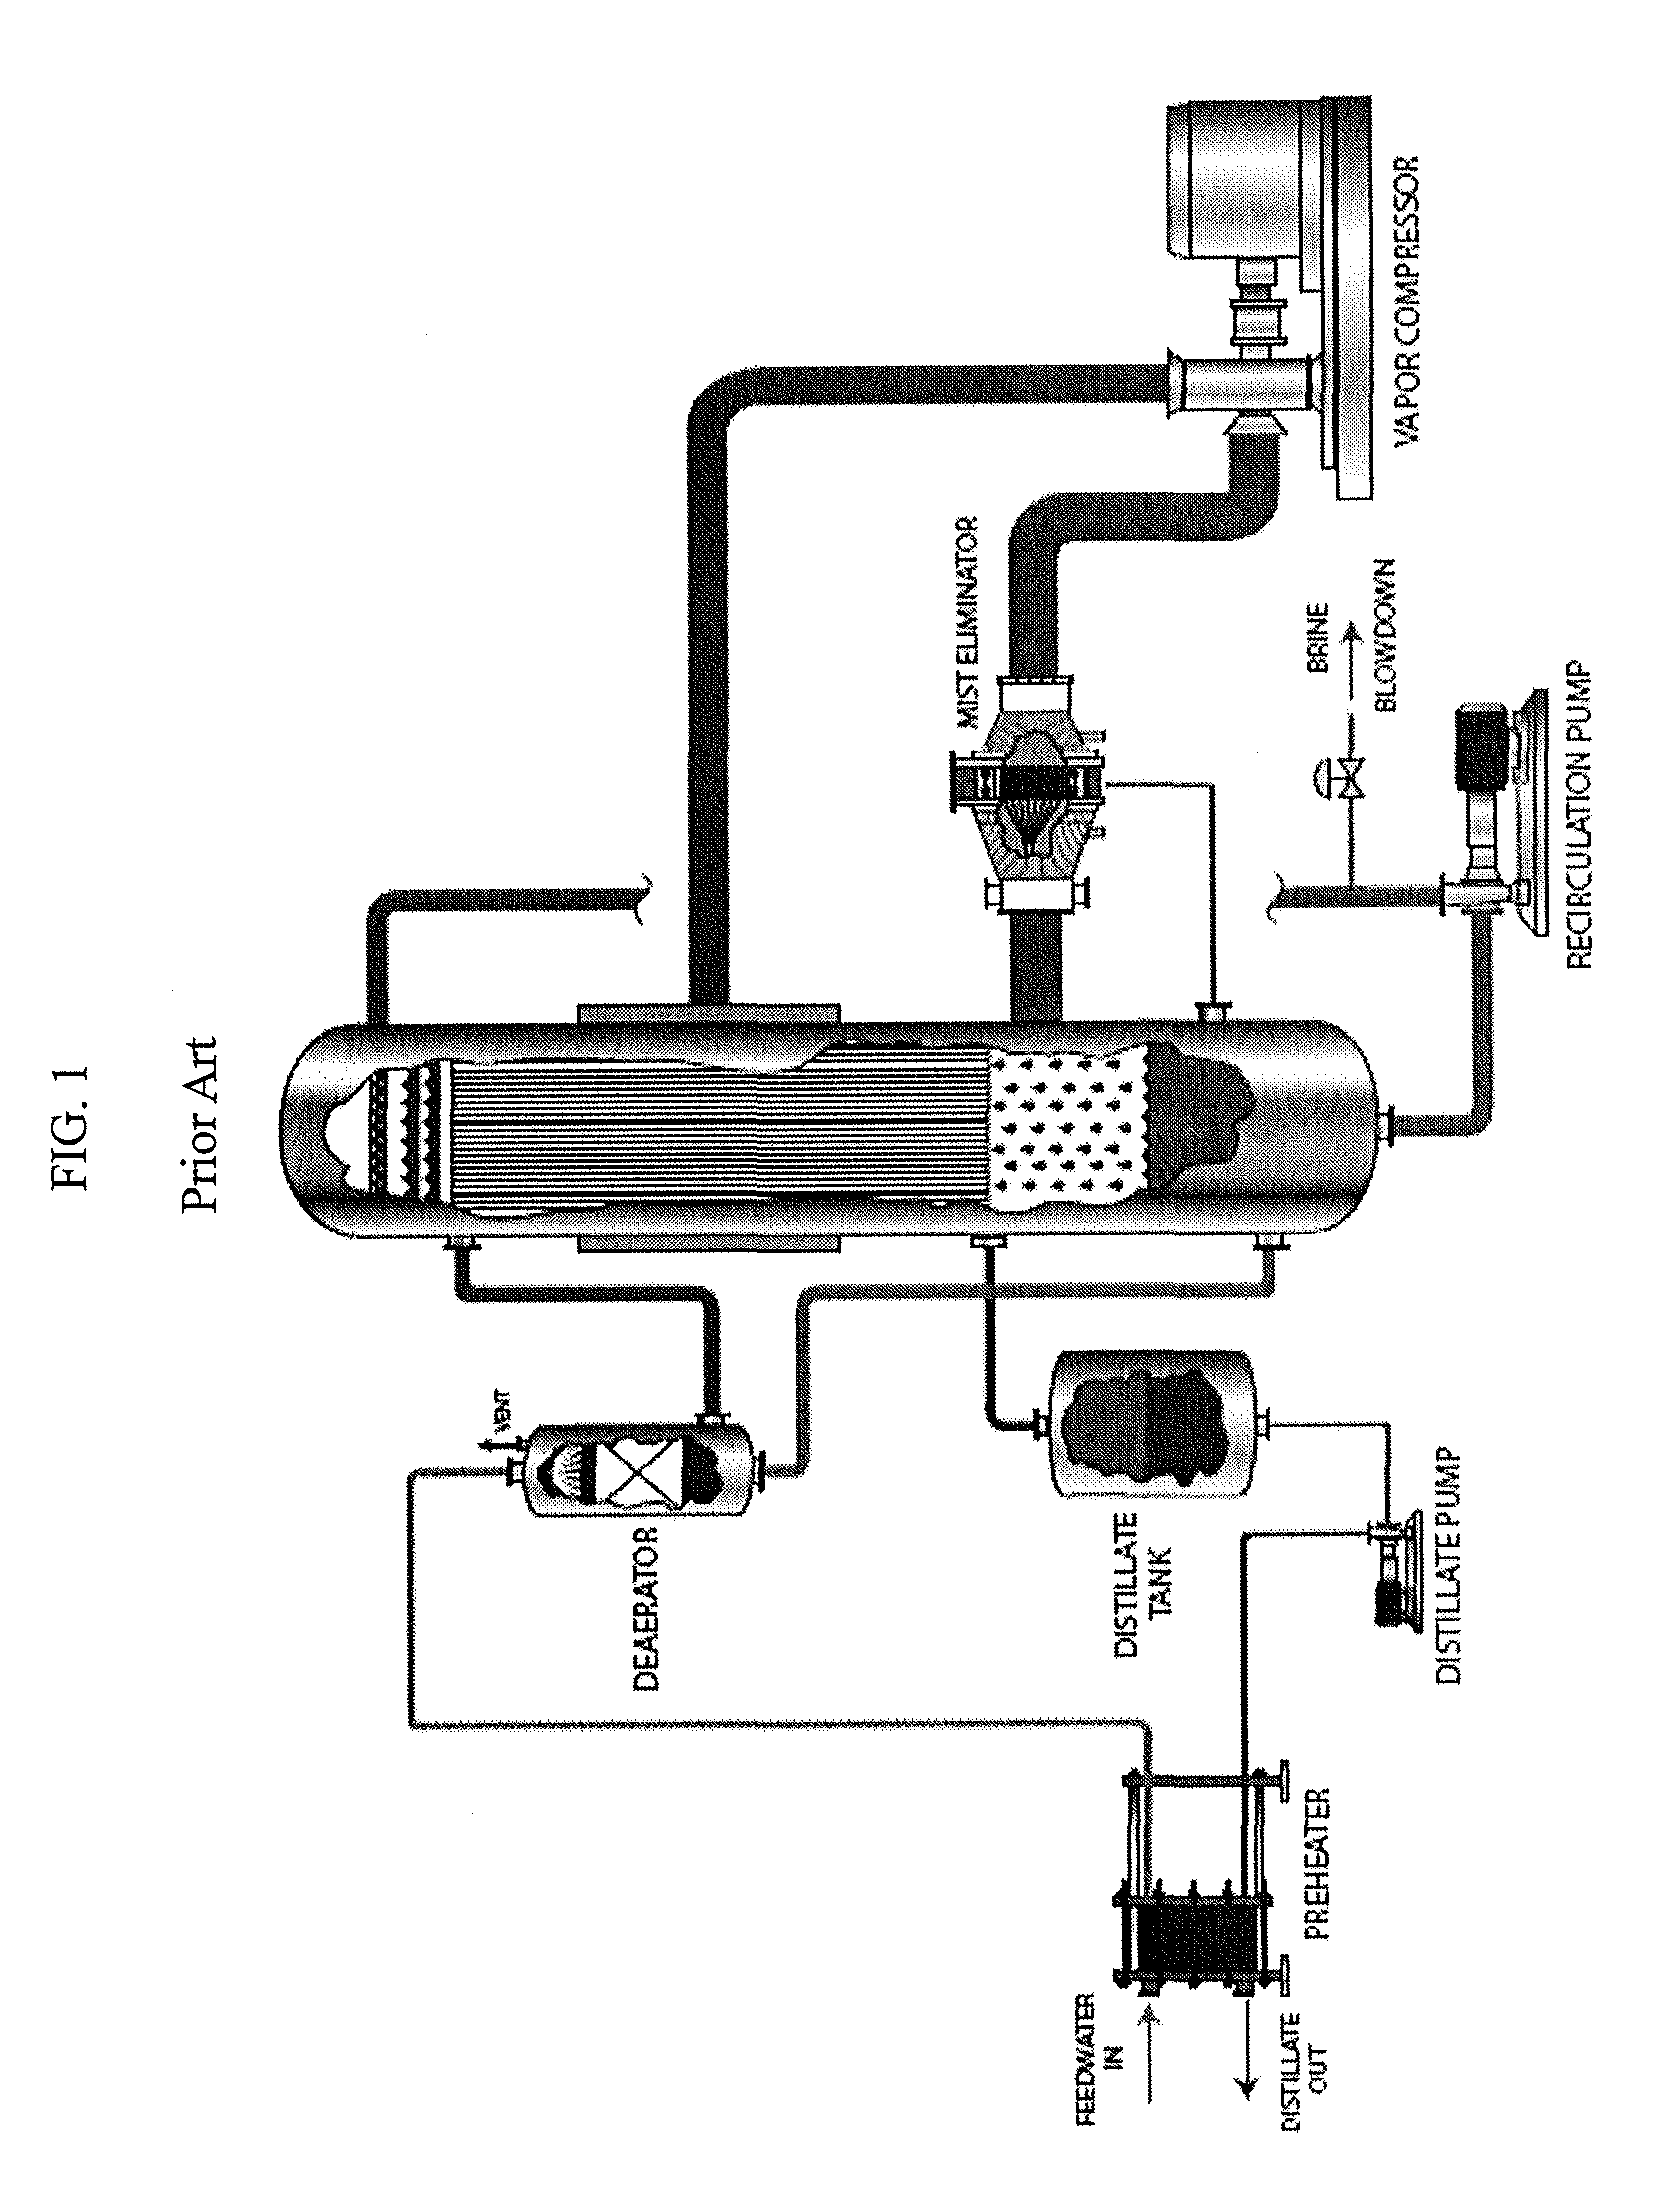 Method and apparatus for recycling water